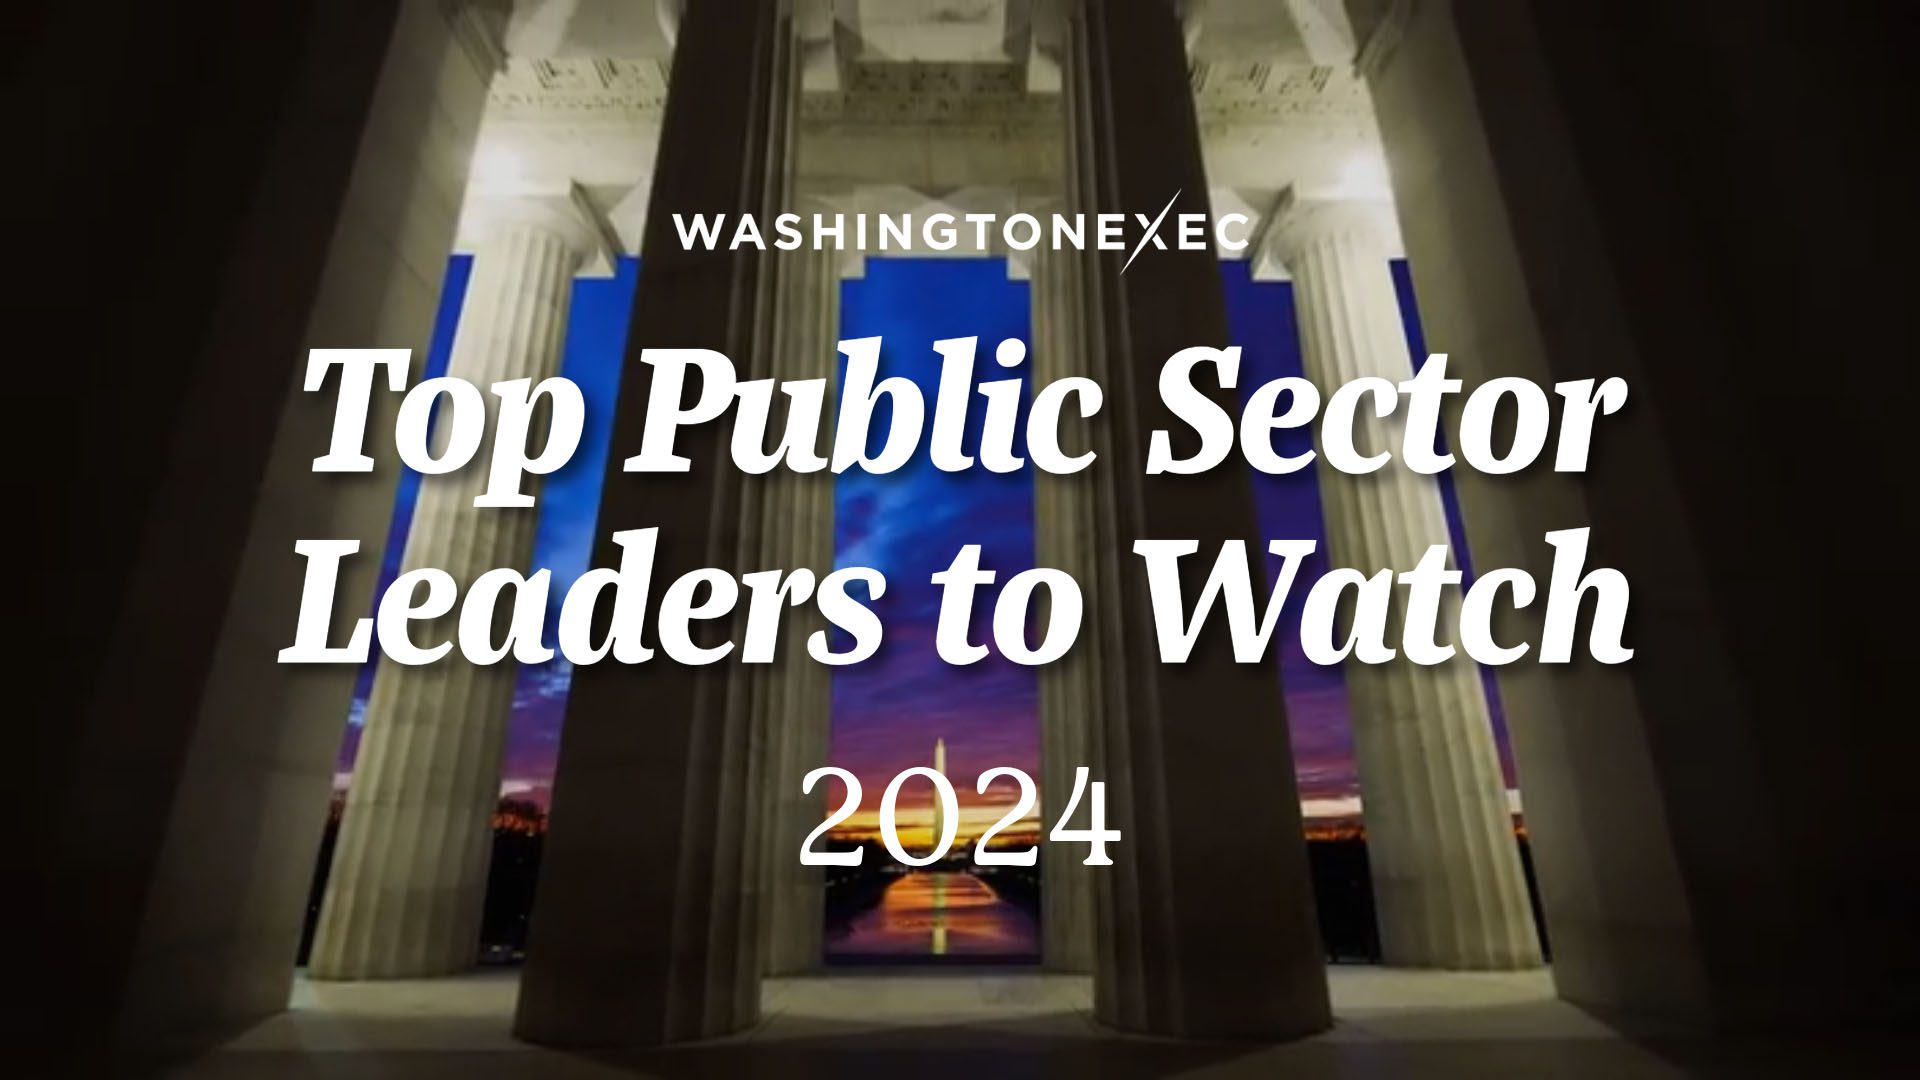 Top Public Sector Leaders to Watch in 2024